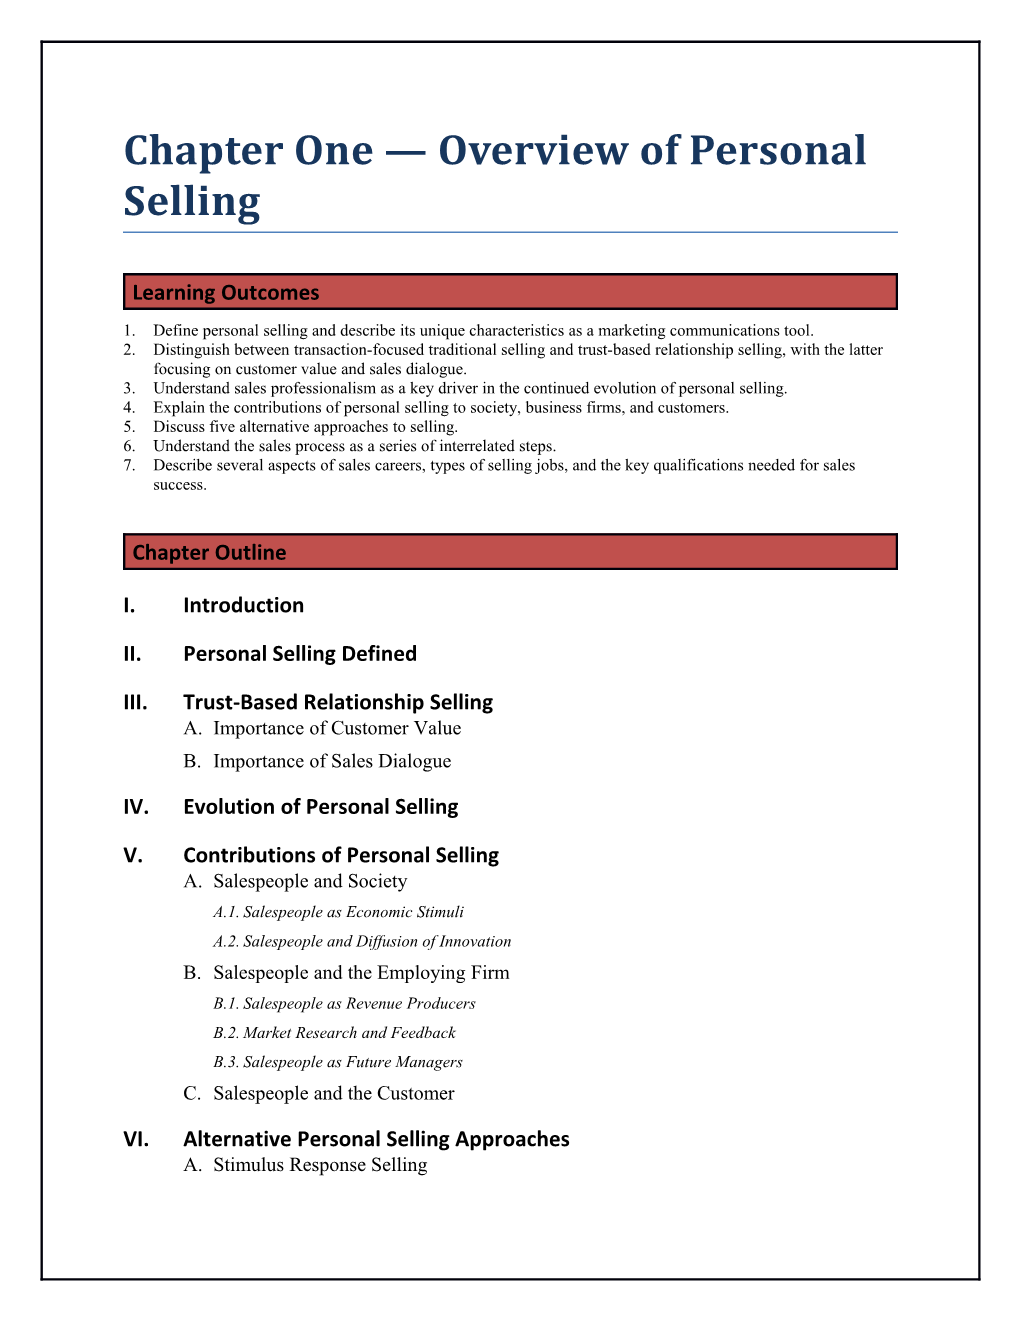 Chapter One Overview of Personal Selling